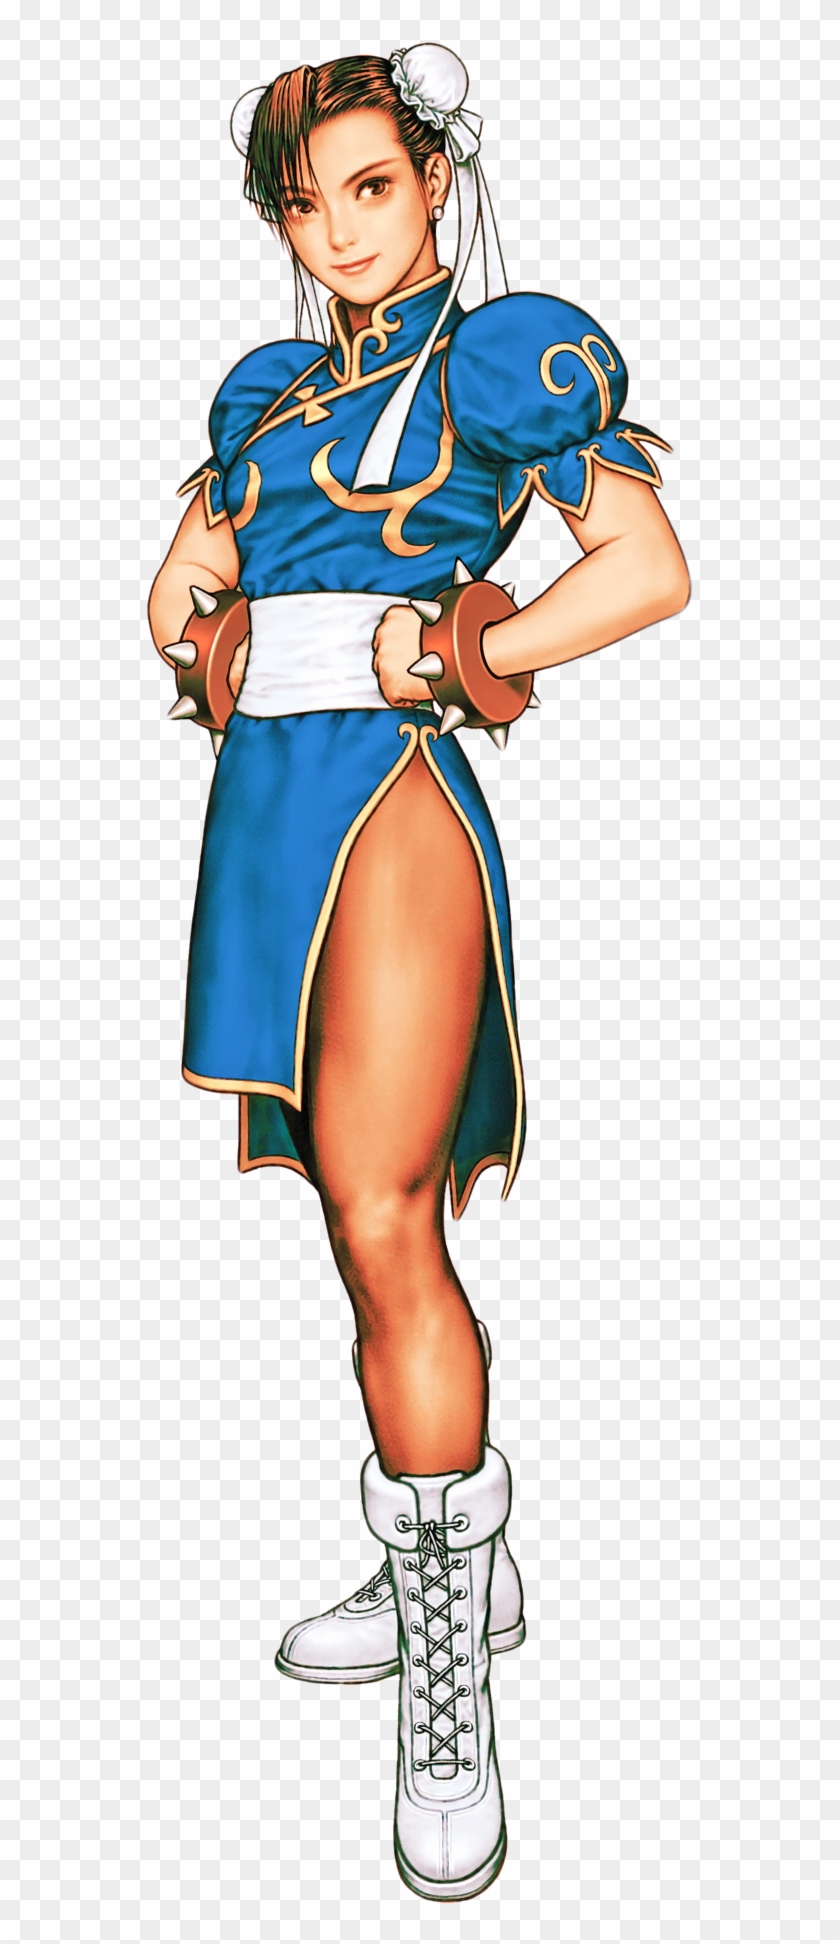 Snk/characters/chun-li Strategywiki, The Video Game - Chang Lee Street Fighter #928463